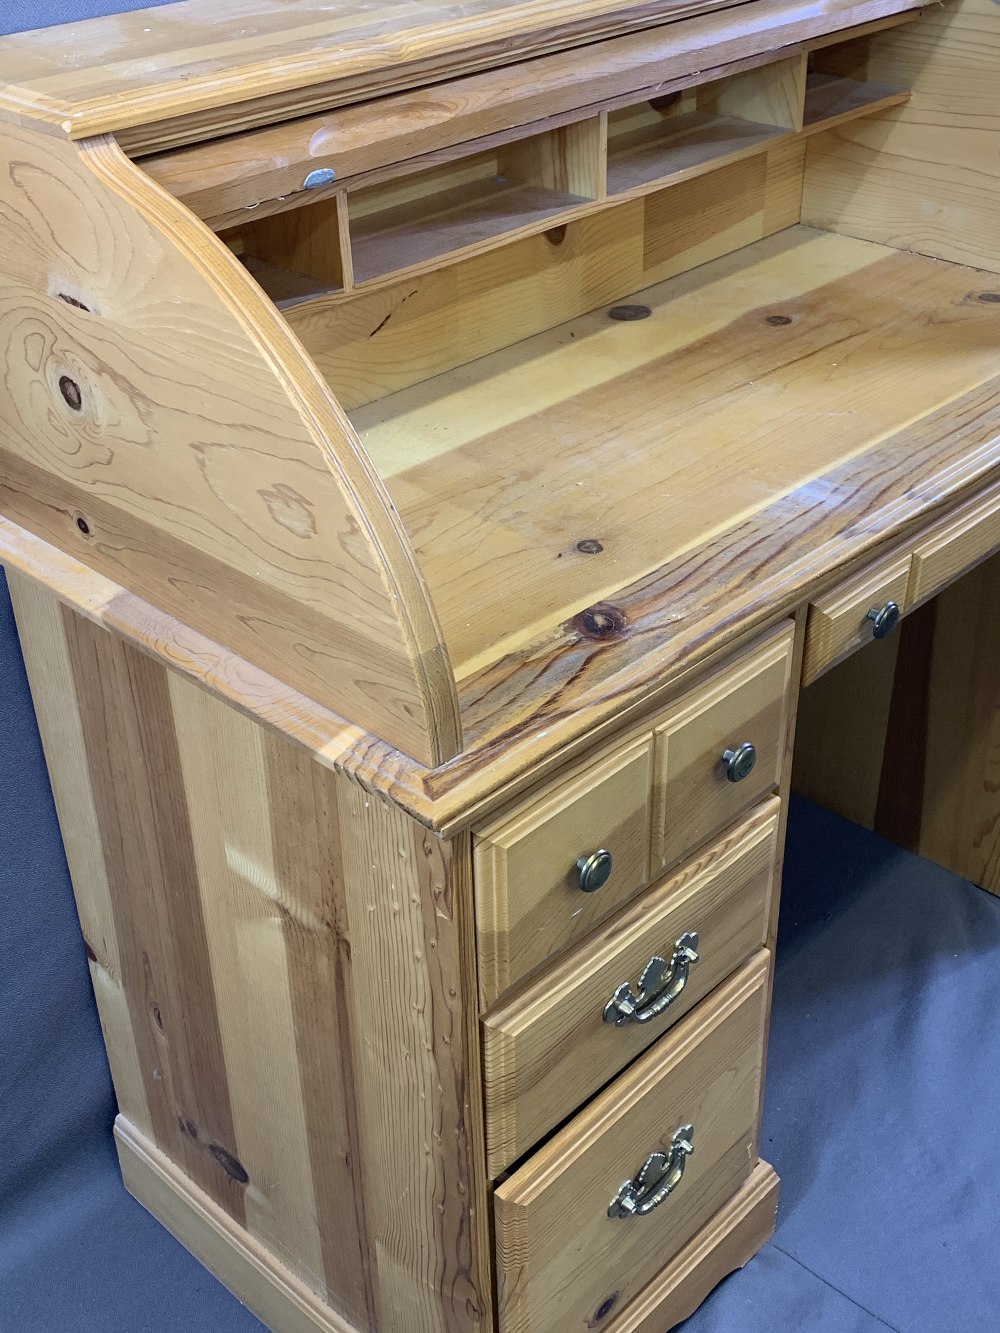 MODERN PINE TAMBOUR FRONT KNEE-HOLE DESK the top interior with an arrangement of pigeonholes over - Image 2 of 4